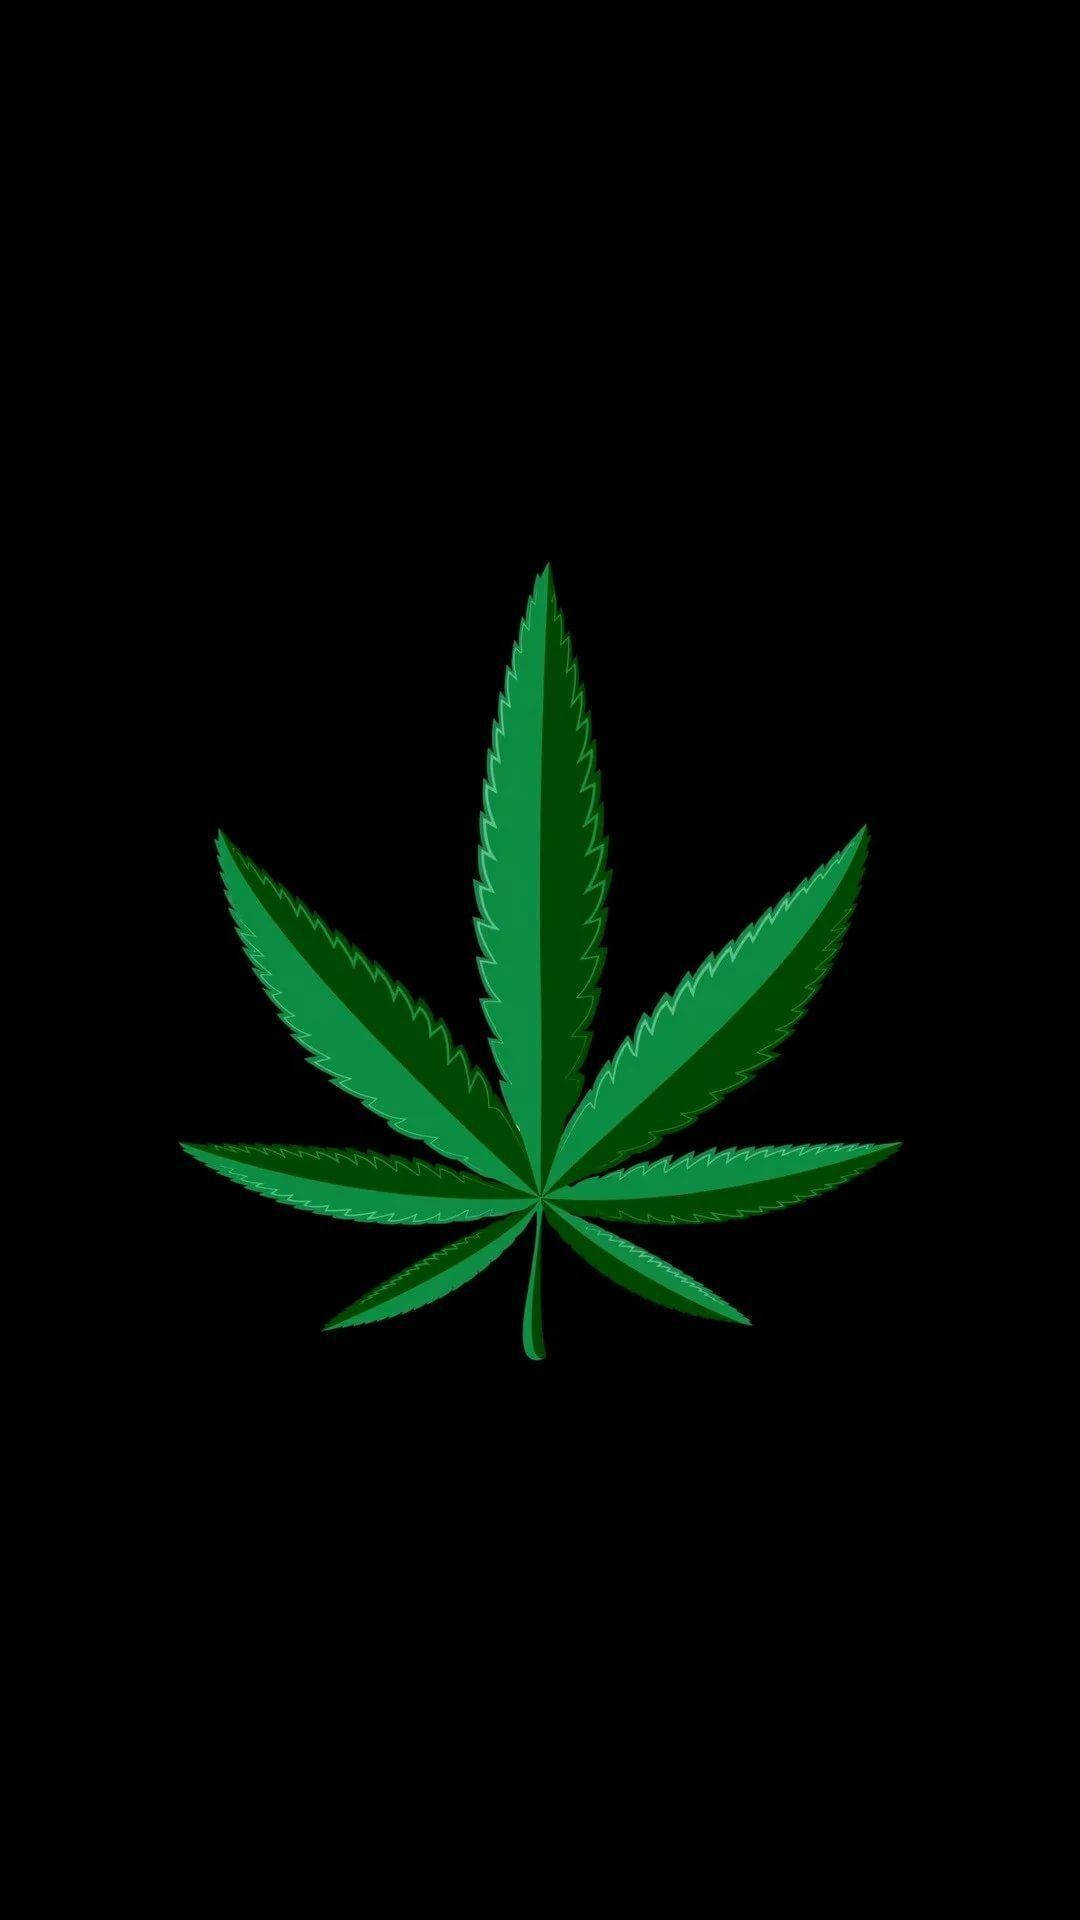 Free Weed Iphone Wallpaper Downloads, [100+] Weed Iphone Wallpapers for  FREE 